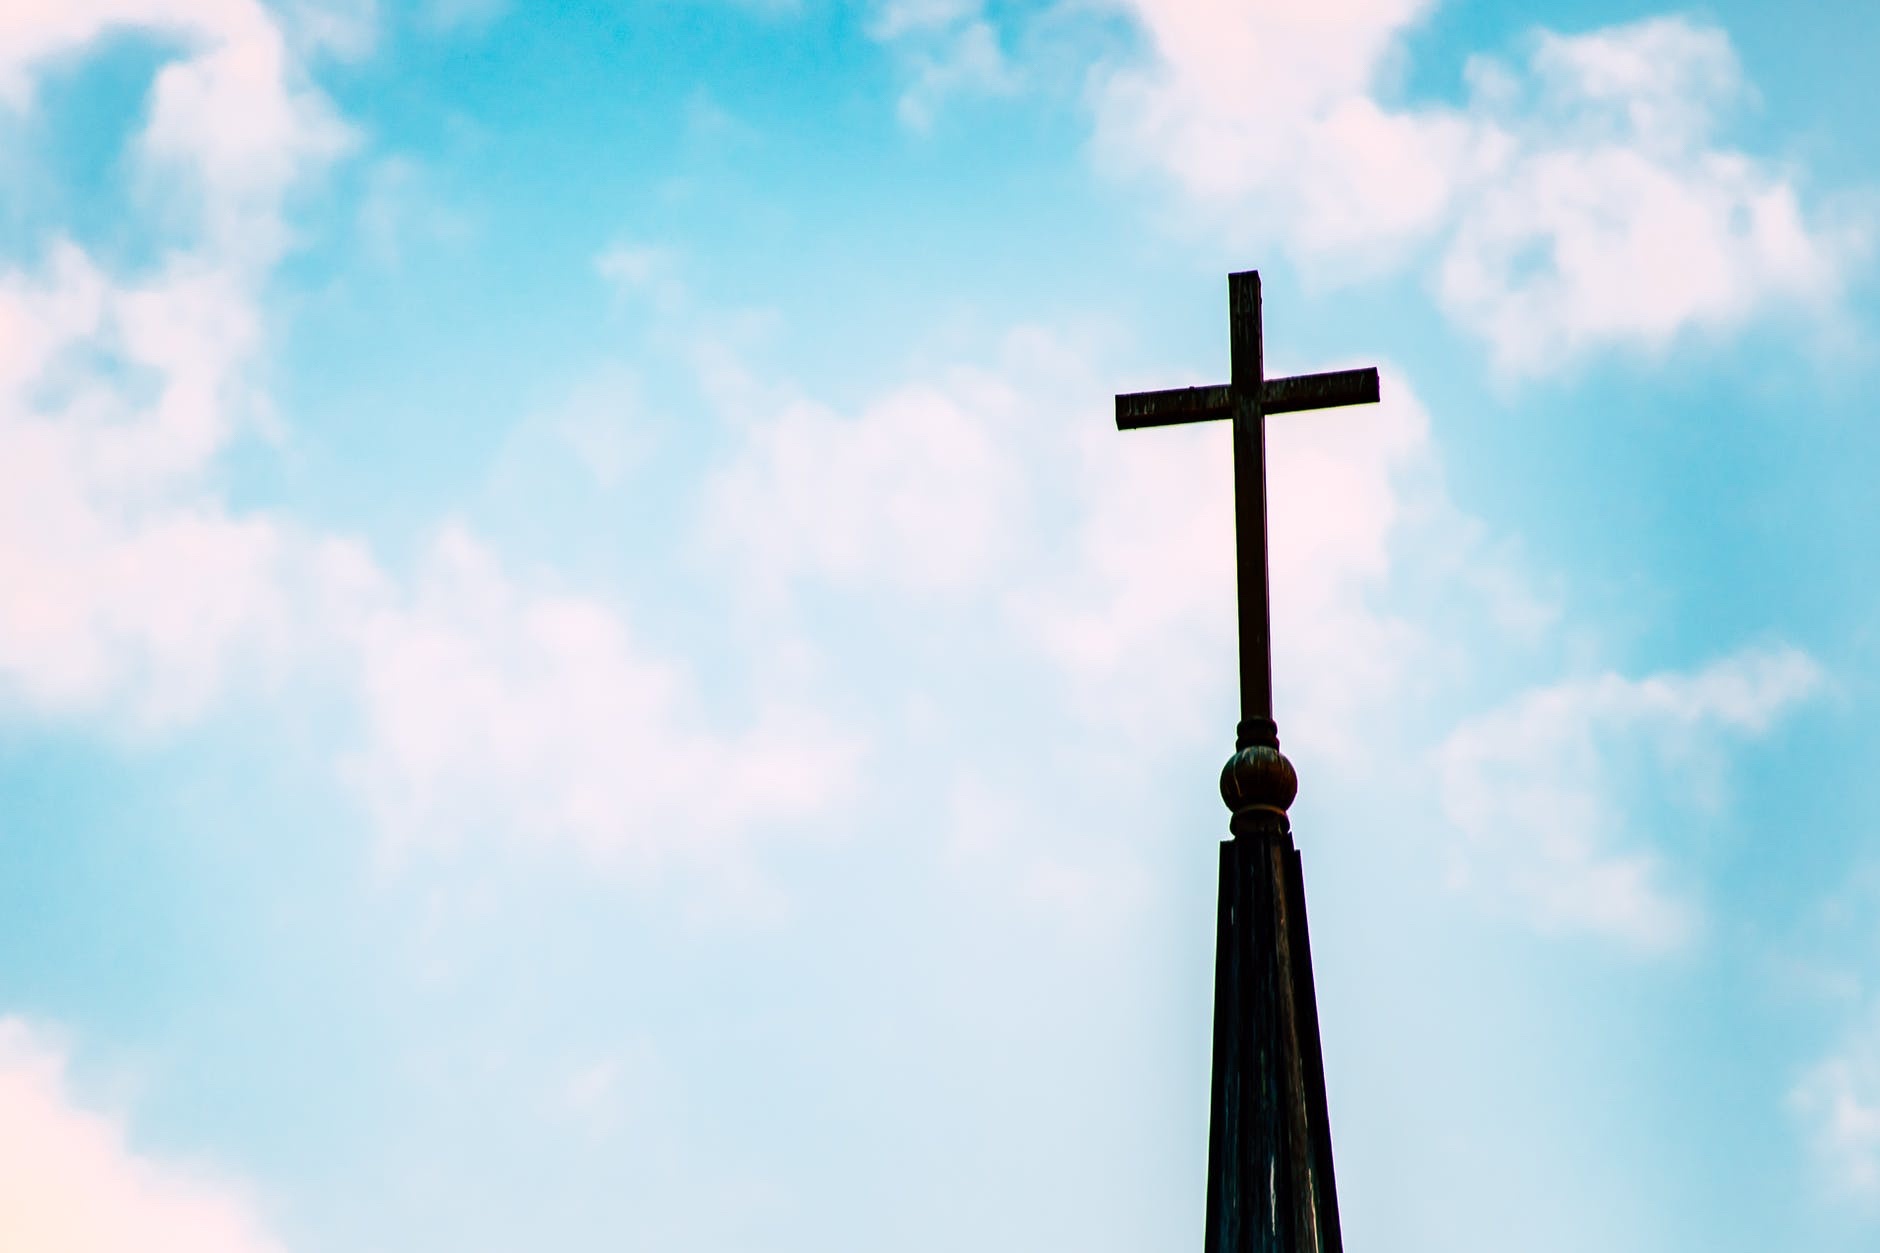 Tennessee Governor’s Office of Faith-Based and Community Initiatives Releases Guidance on Reopening Houses of Worship - If you have a church or place of worship in Tennessee here are some guidelines in order to reopen.